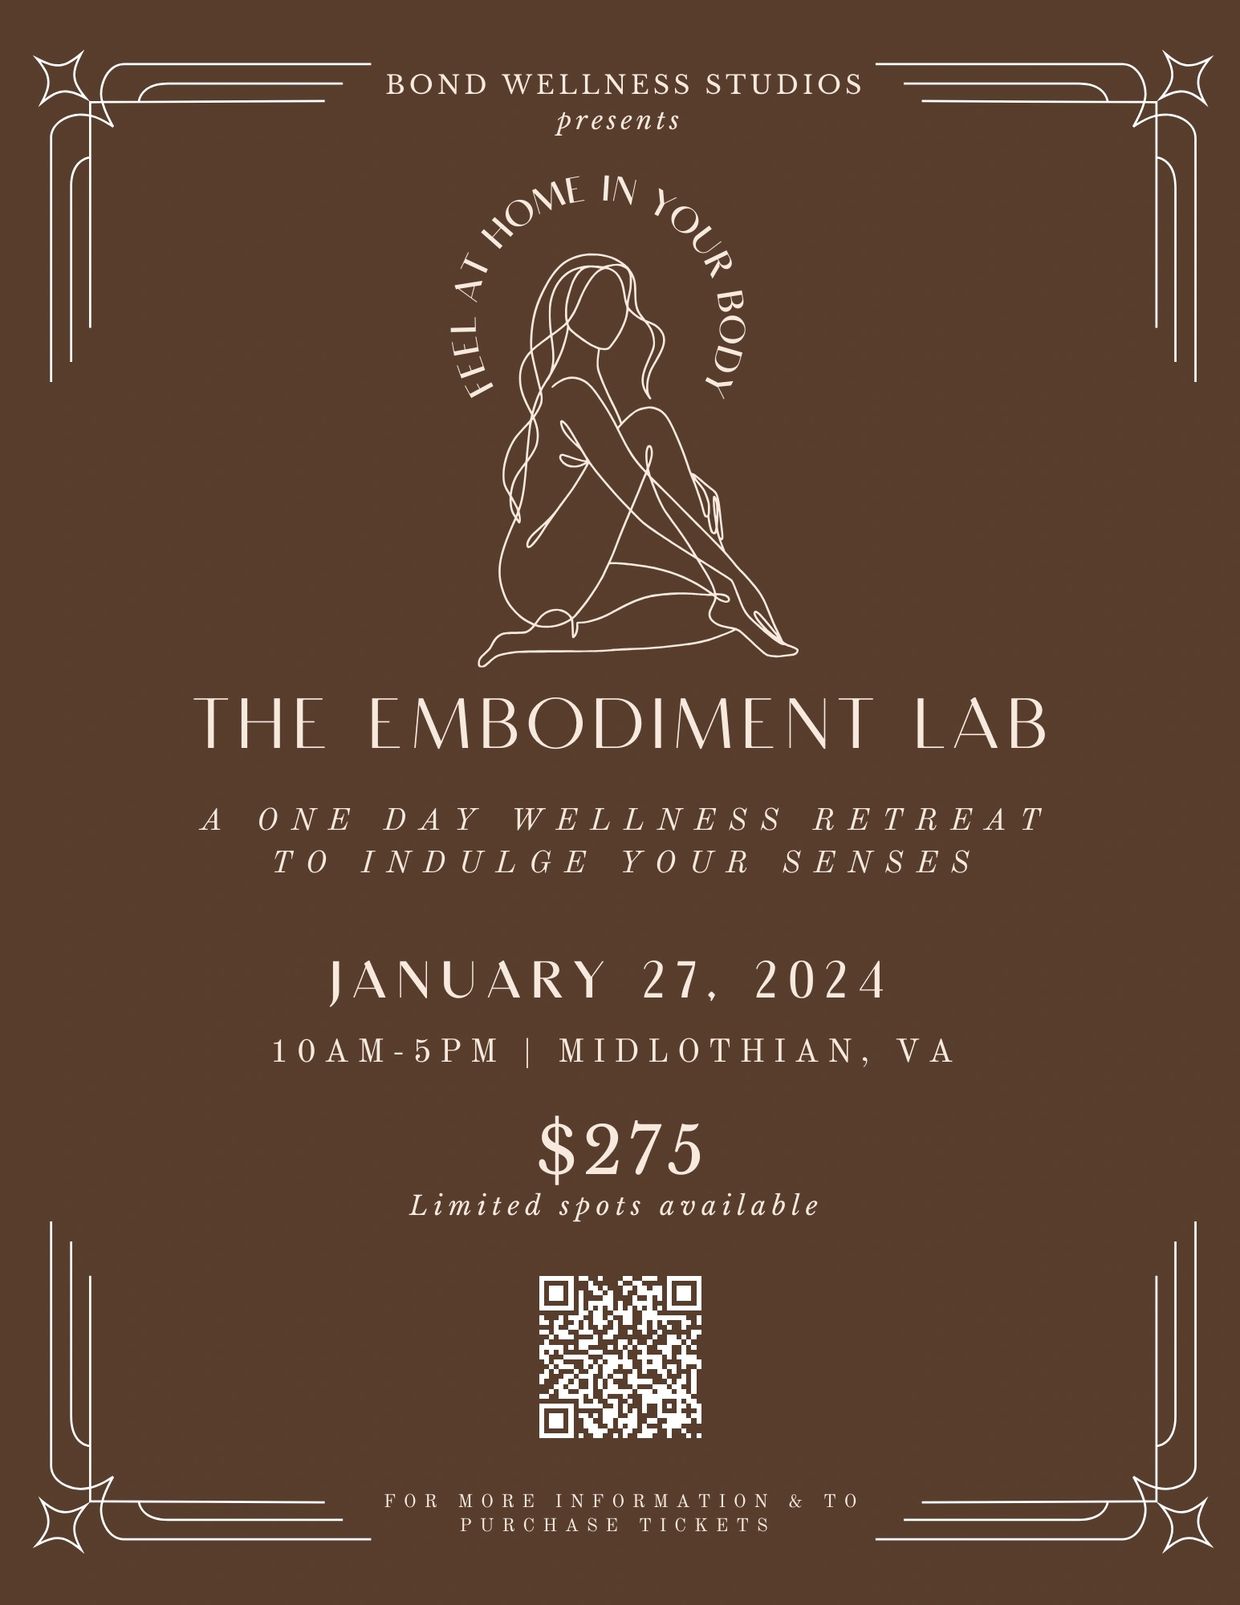 The Embodiment Lab is a unique experience and like no other. Jump start 2024 with a whole new way of